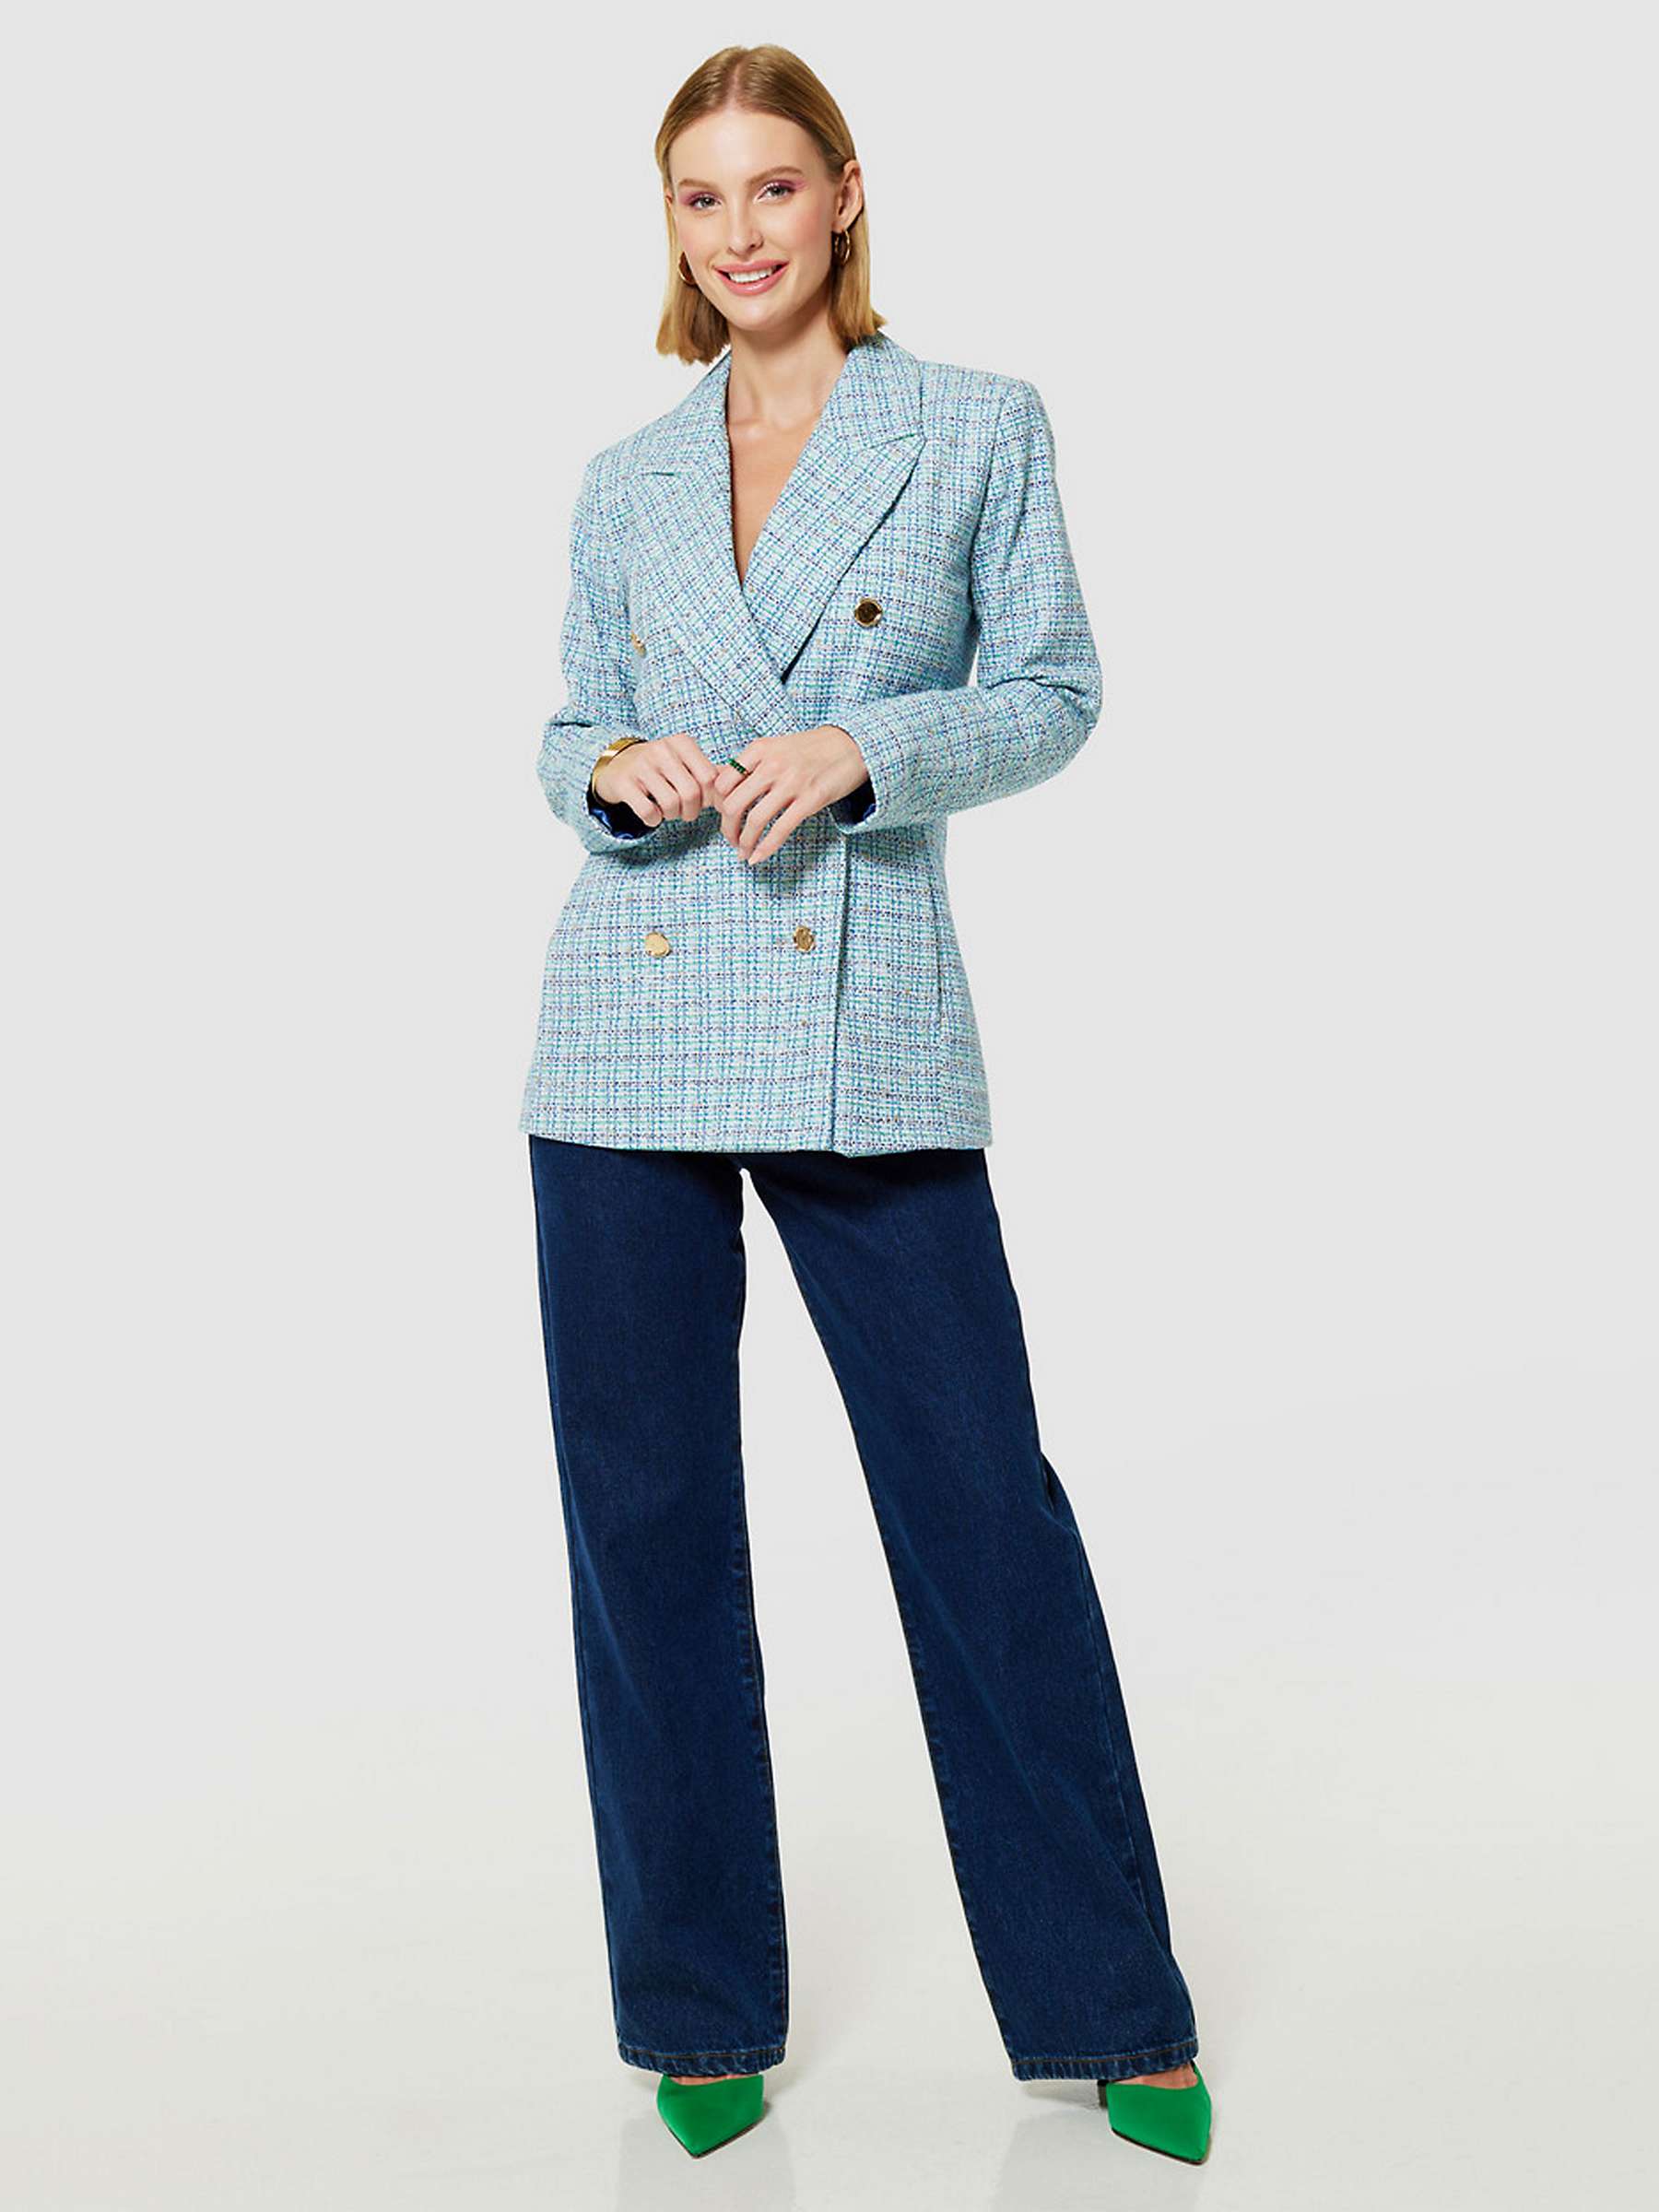 Buy Closet London Tweed Double Breasted Blazer, Blue Online at johnlewis.com